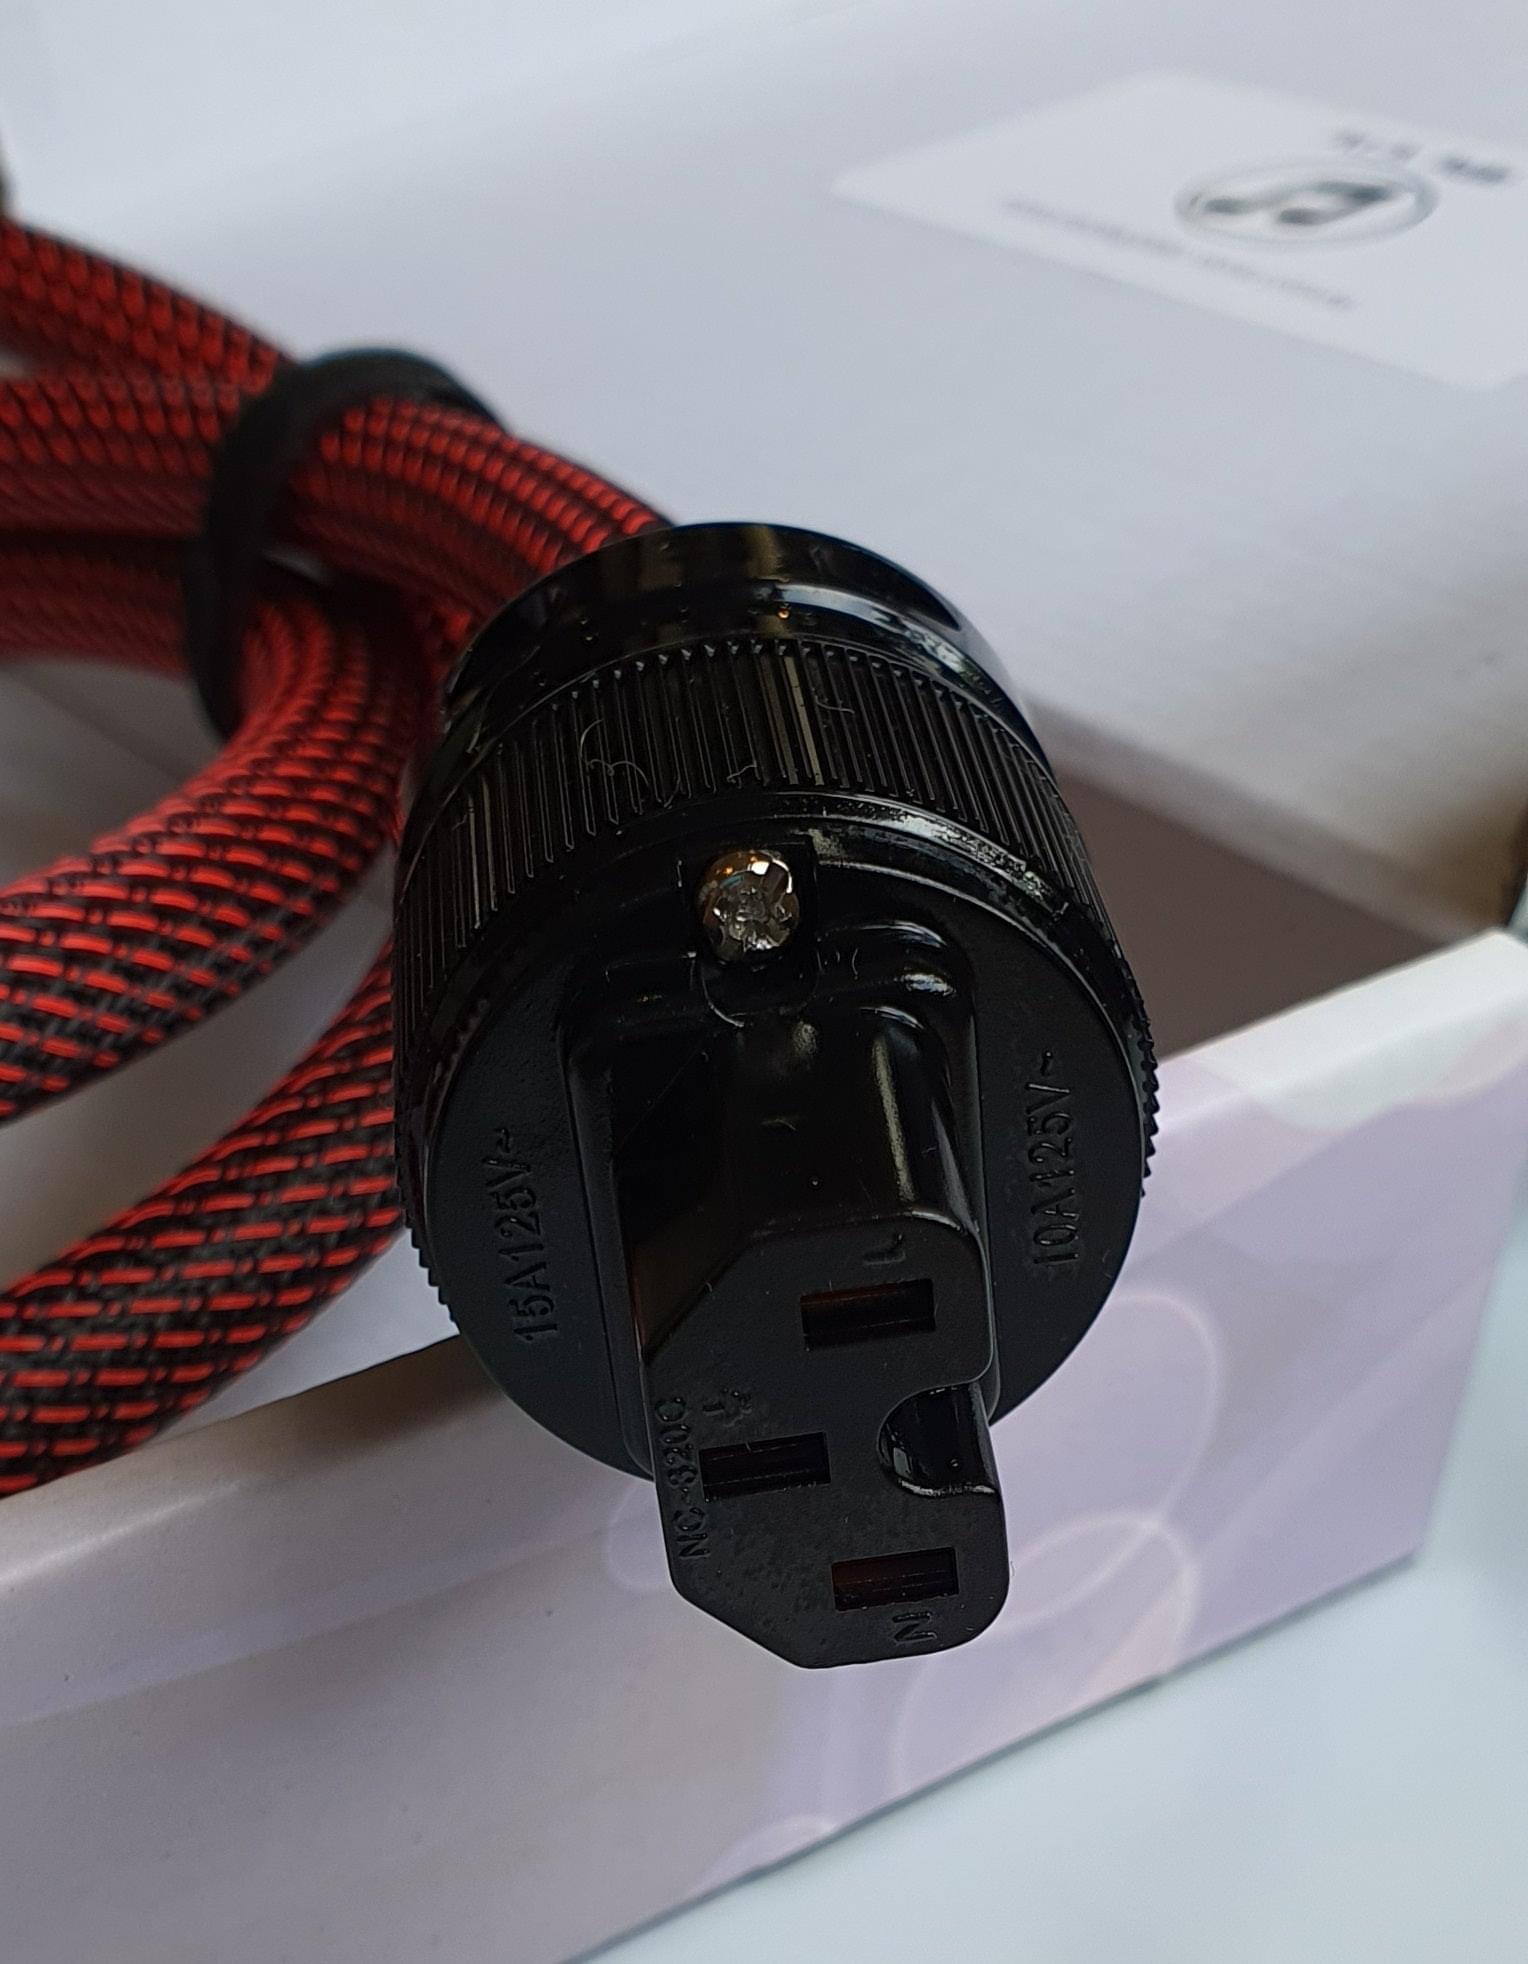 Andesine ™ Ultra-pF Audiophile Power Cable